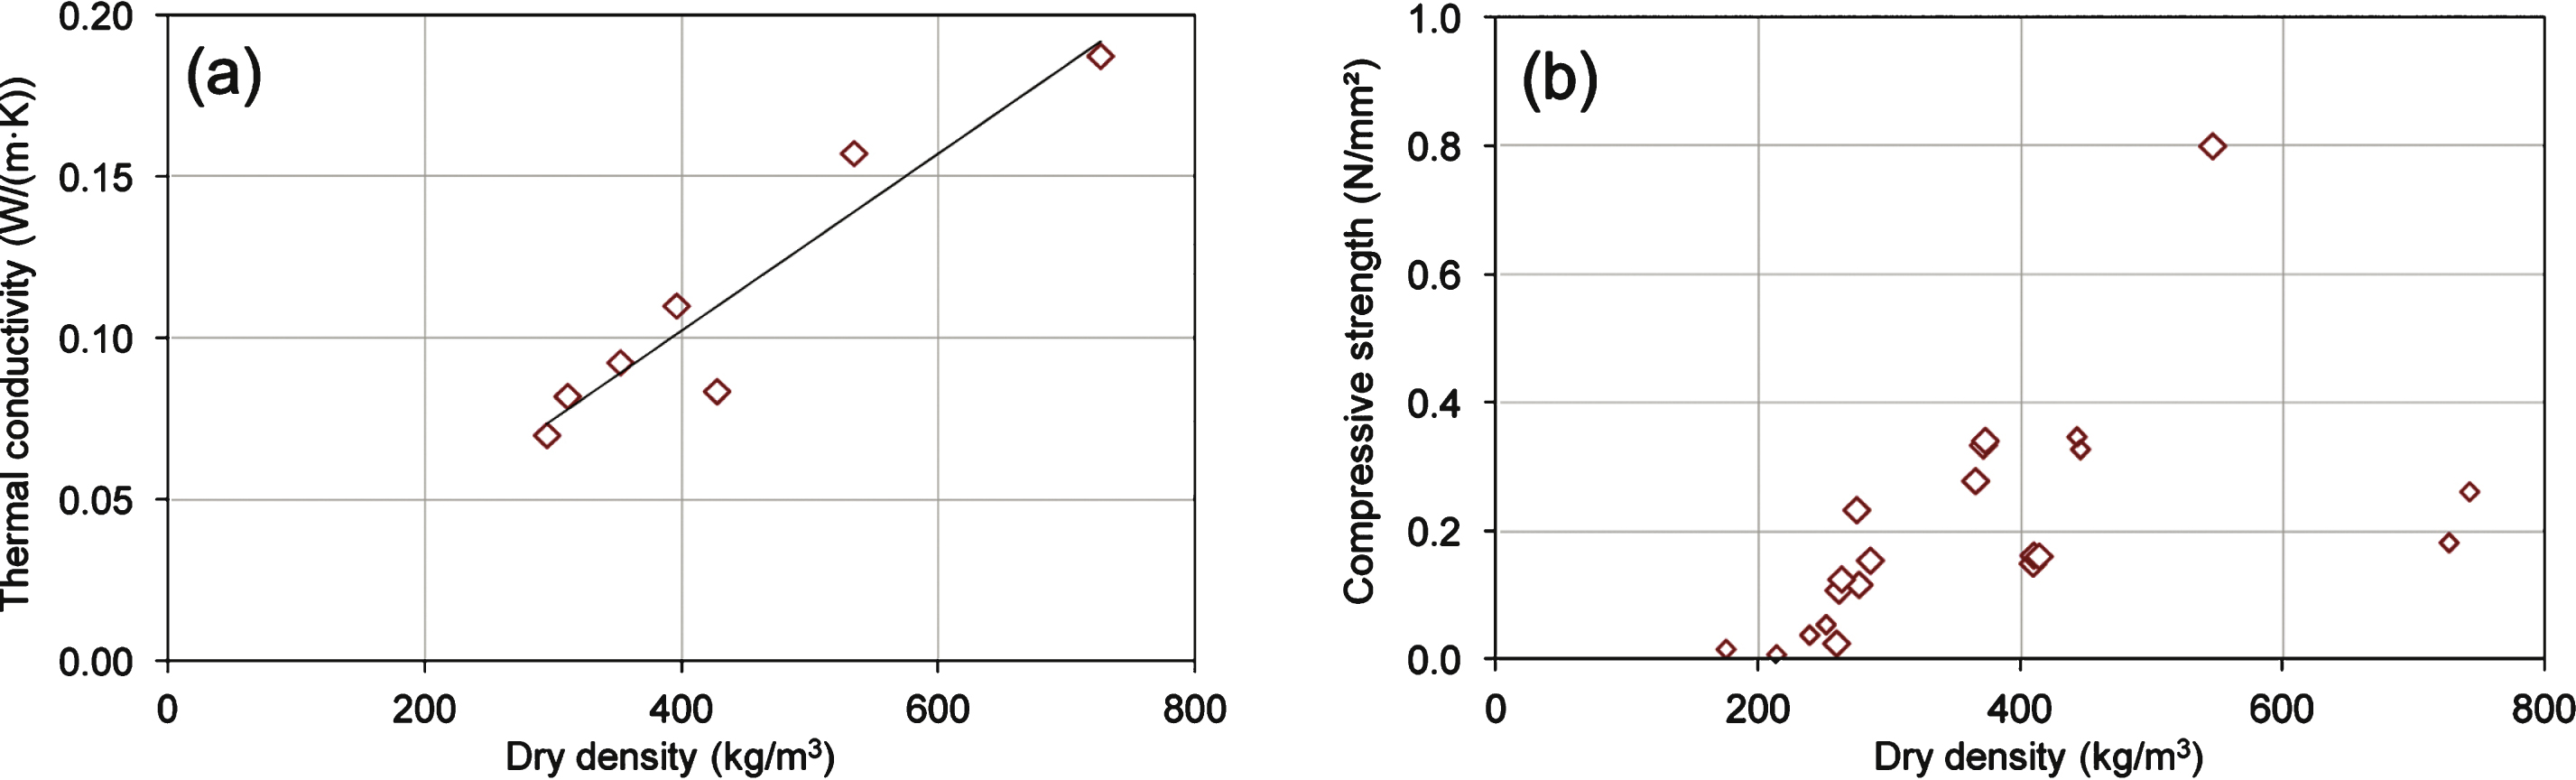 Correlation between CLC dry density and: thermal conductivity (a); compressive strength (b).